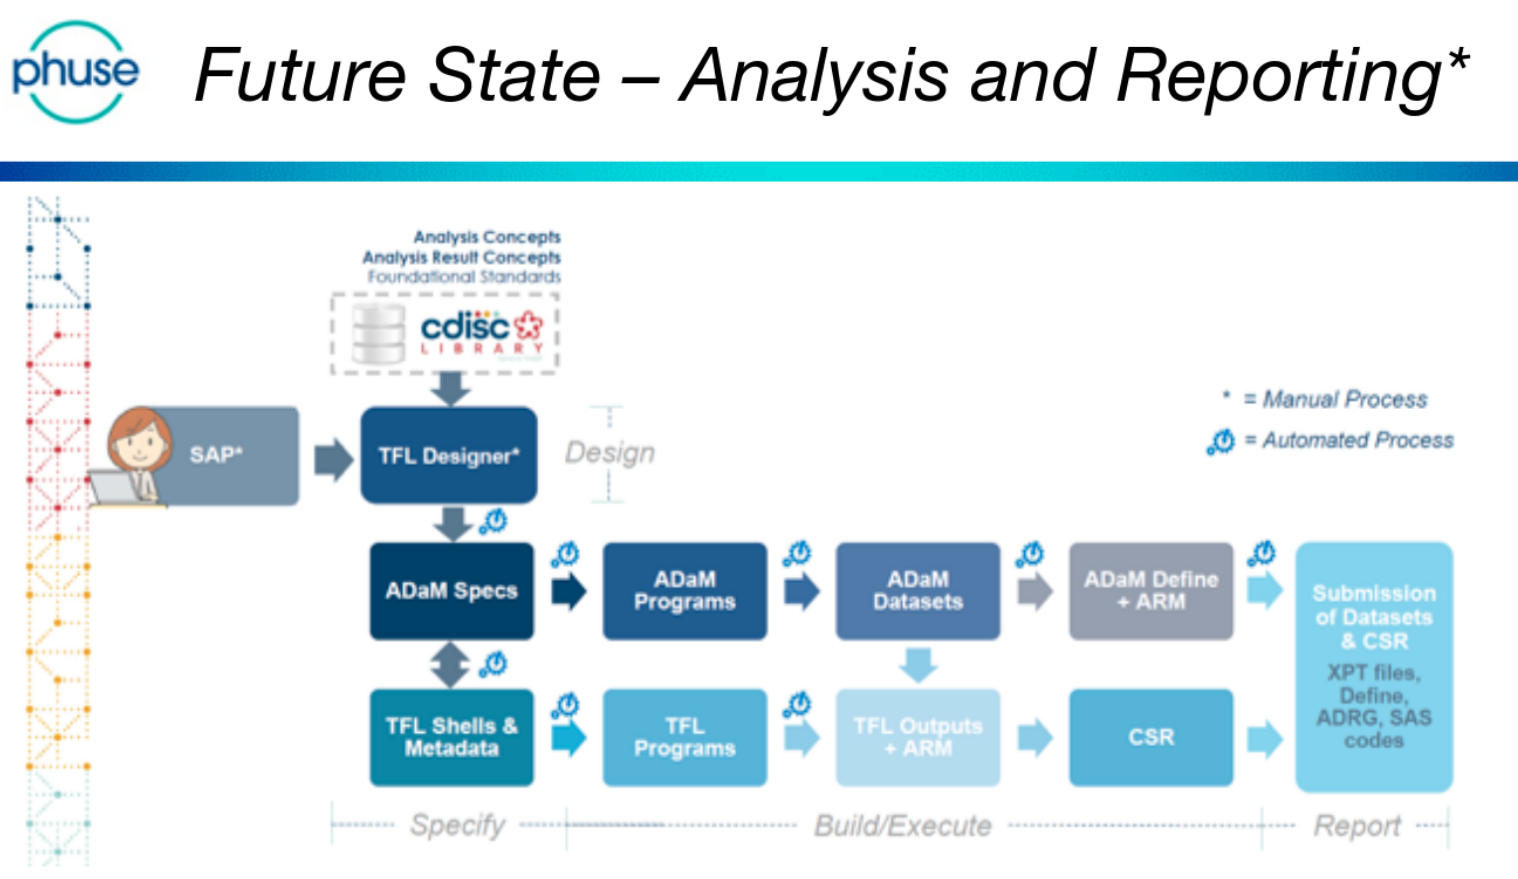 Future state analysis and reporting